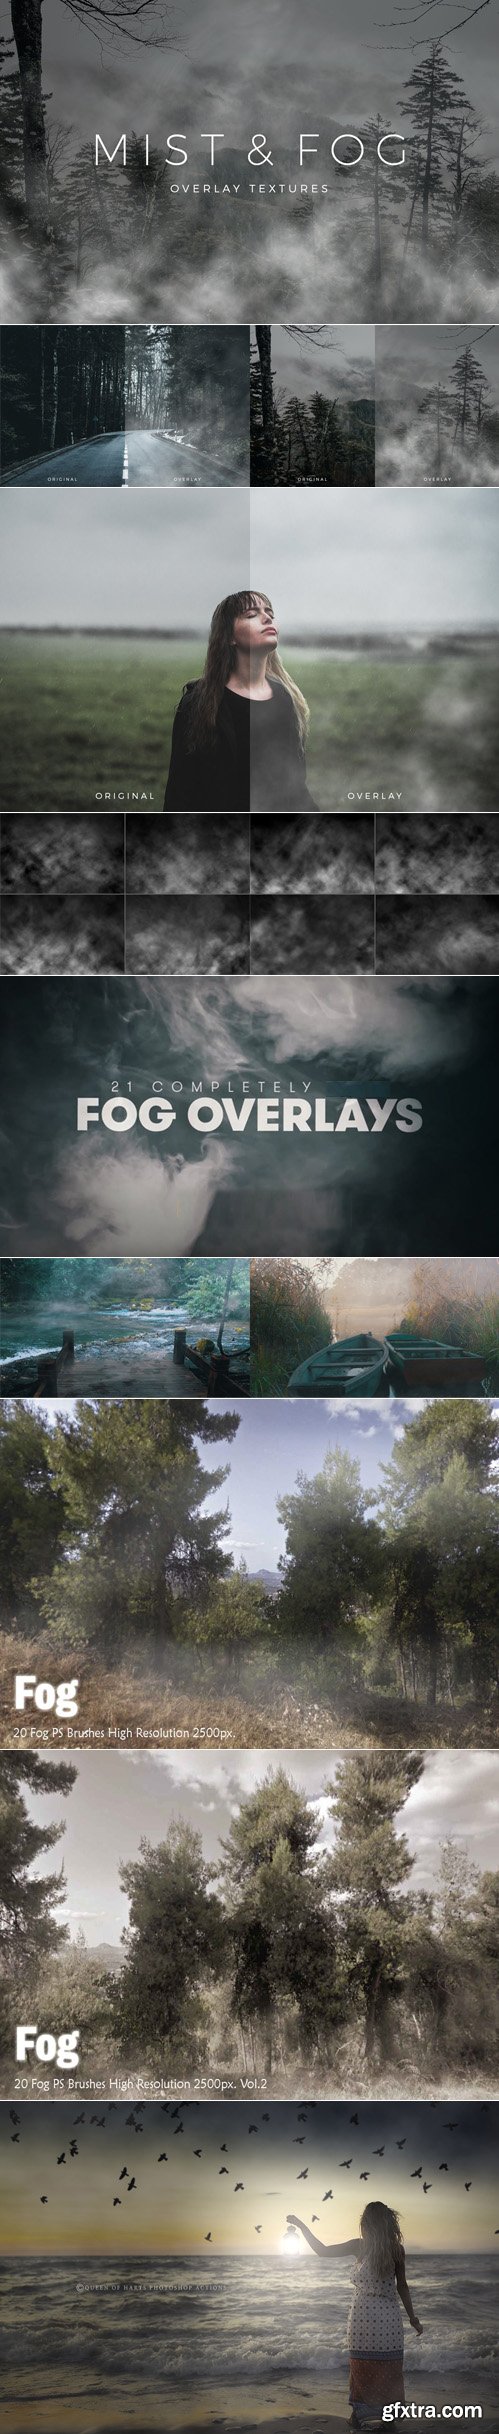 Mist & Fog Overlay [Textures/PS Brushes/4K Footages]